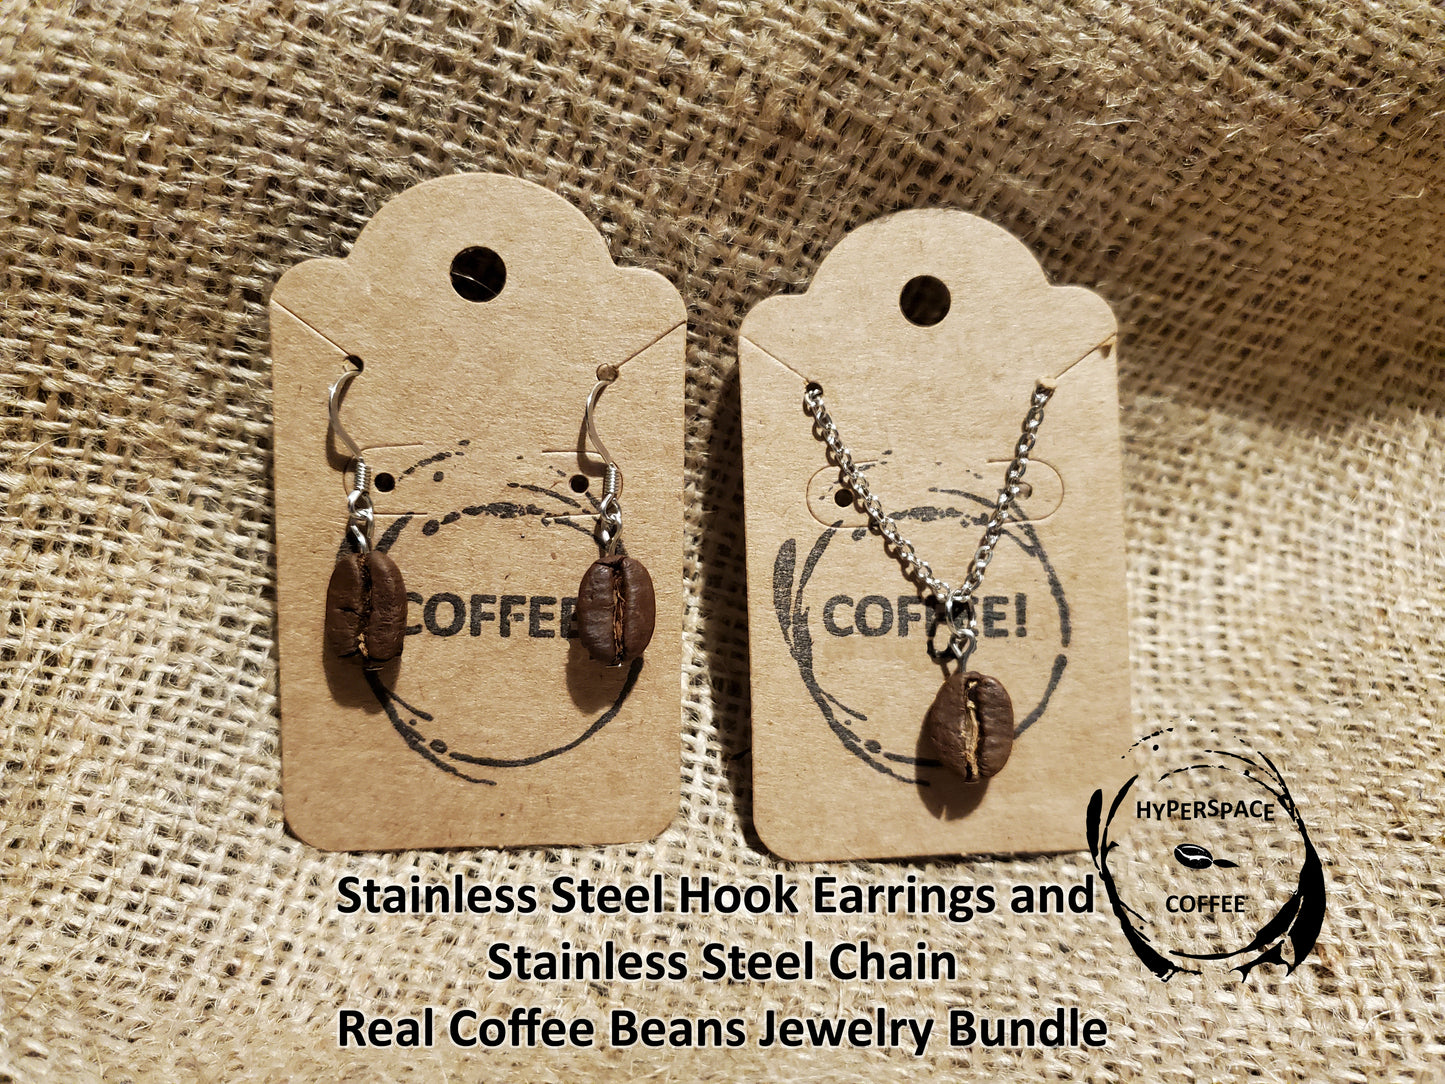 Hyperspace Coffee Bundle - Stainless Steel Hooks Coffee Bean Dangle Earrings and Stainless Steel Chain with Real Coffee Bean Dangle Pendant